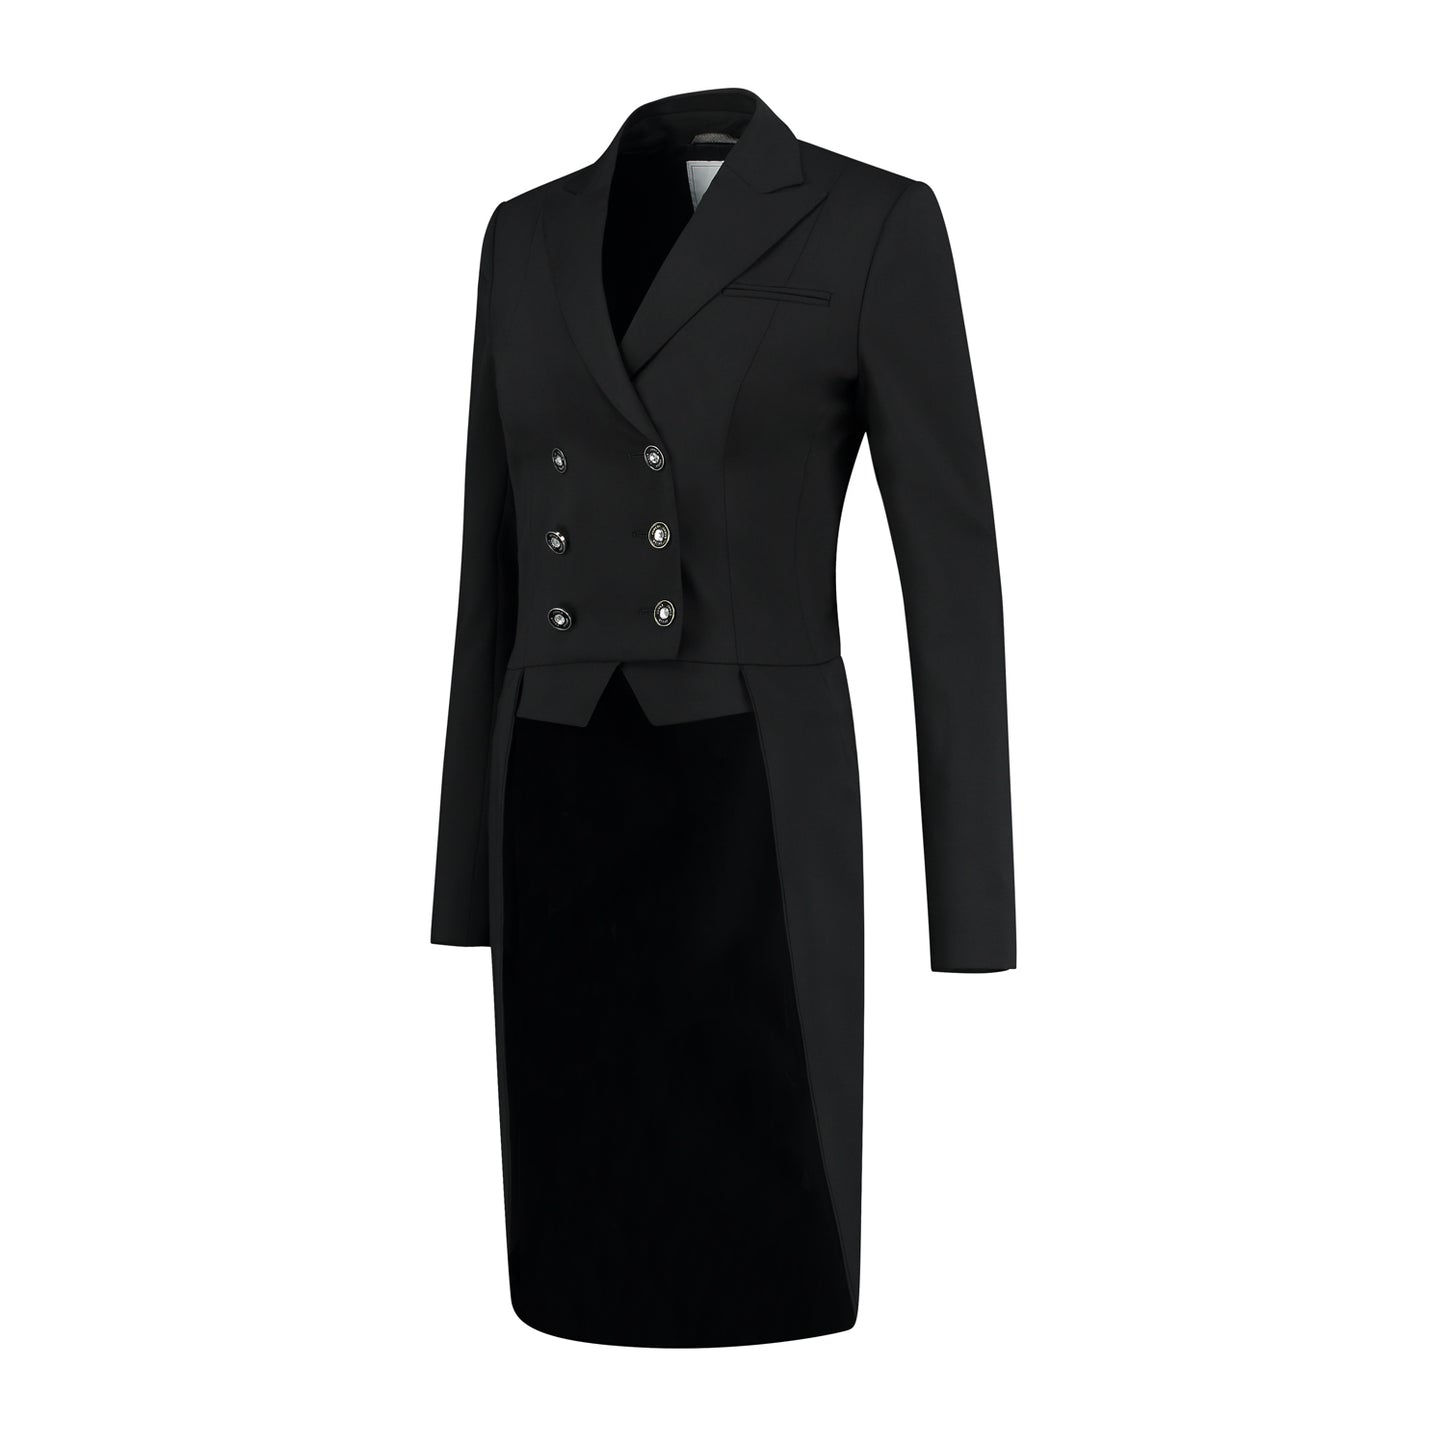 Tailcoat - Classic black or navy